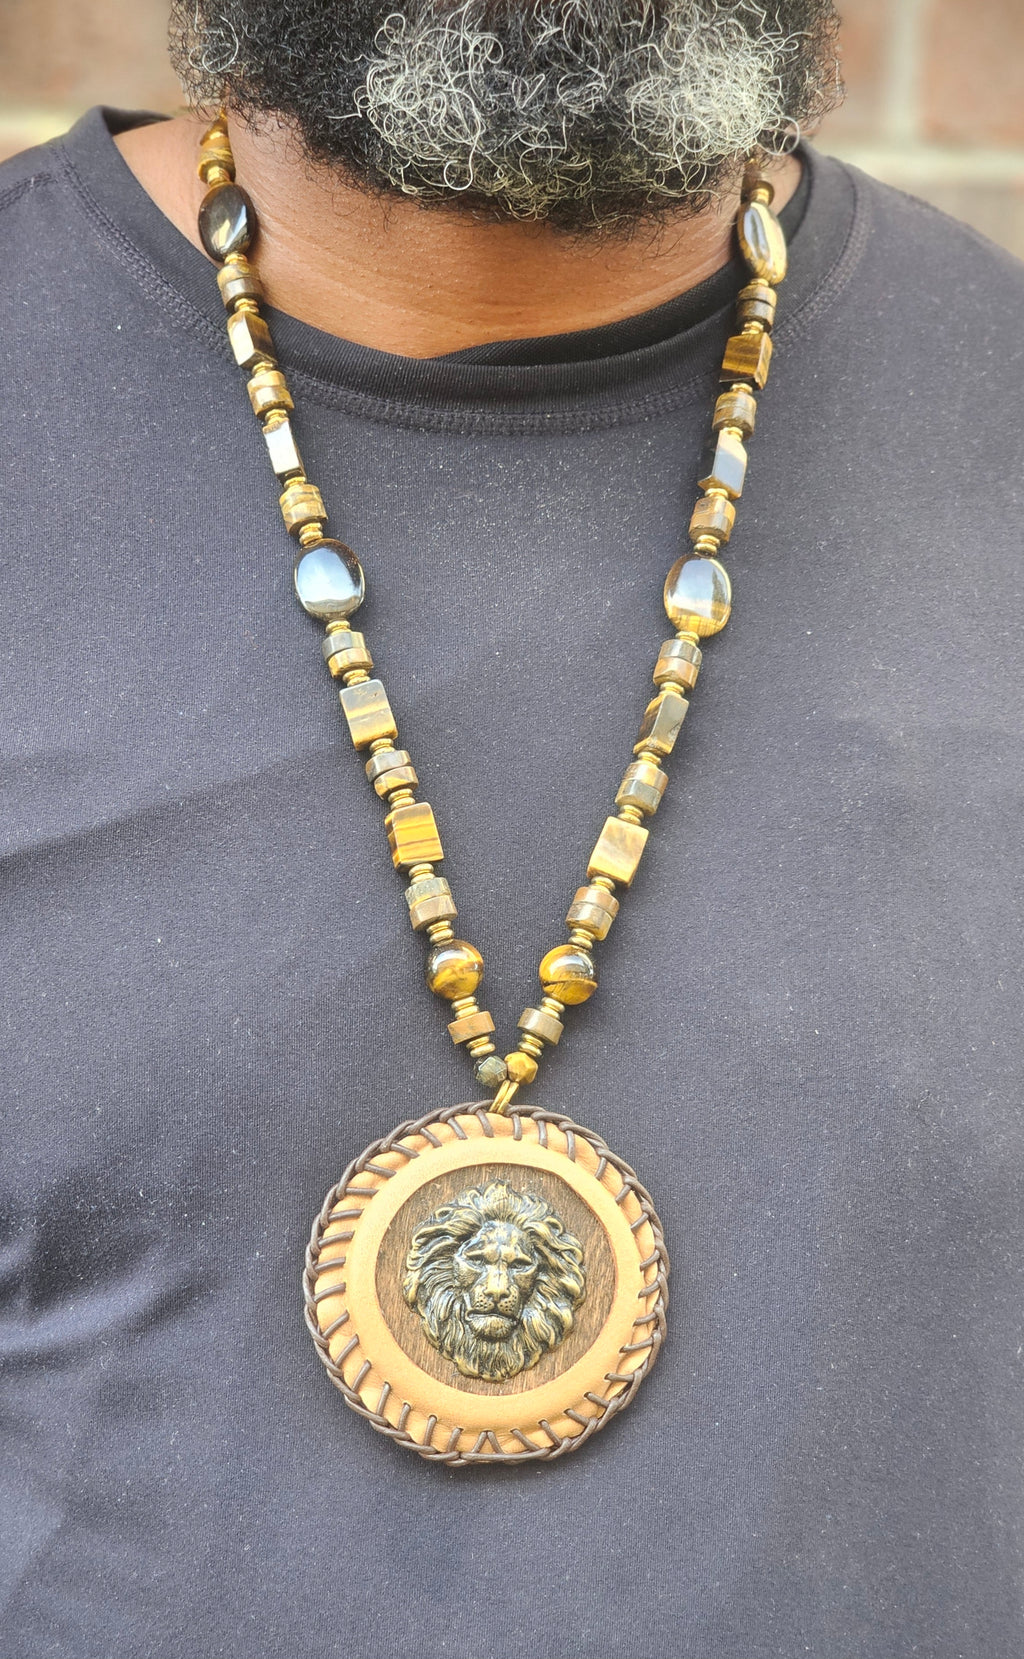 Leather Wrapped Judah Medallion Necklace